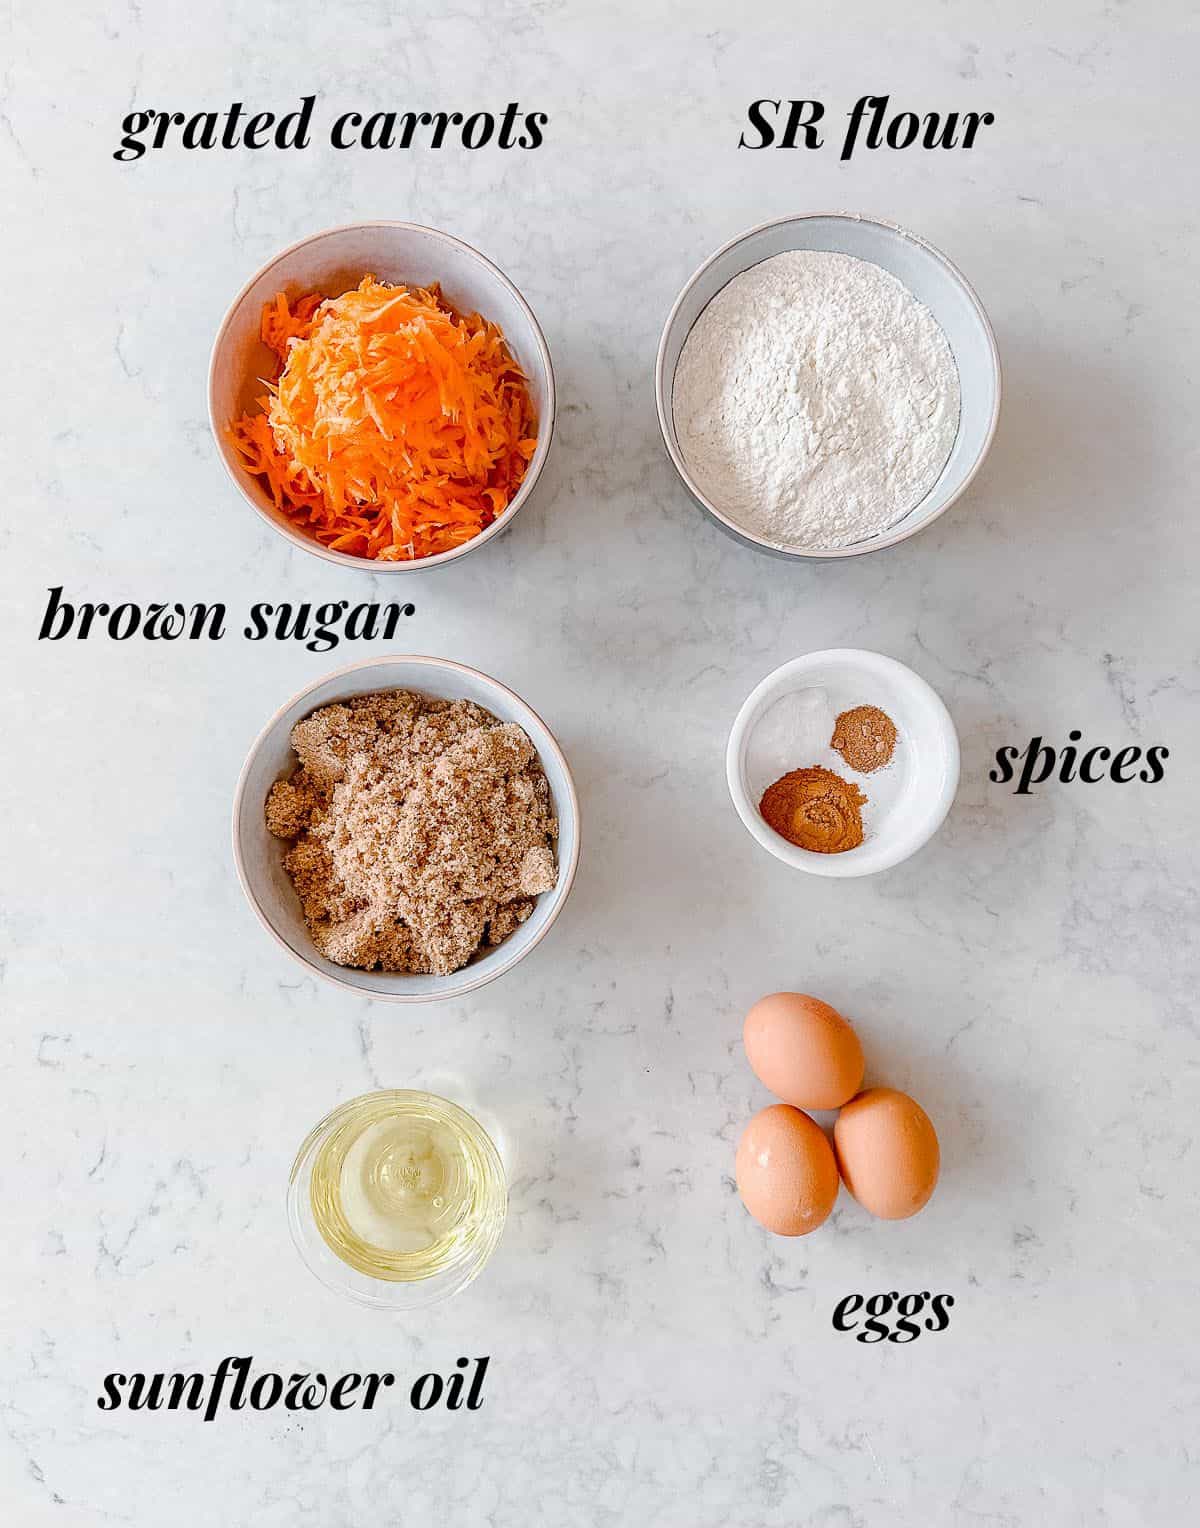 A collection of ingredients used to make Carrot Cake.